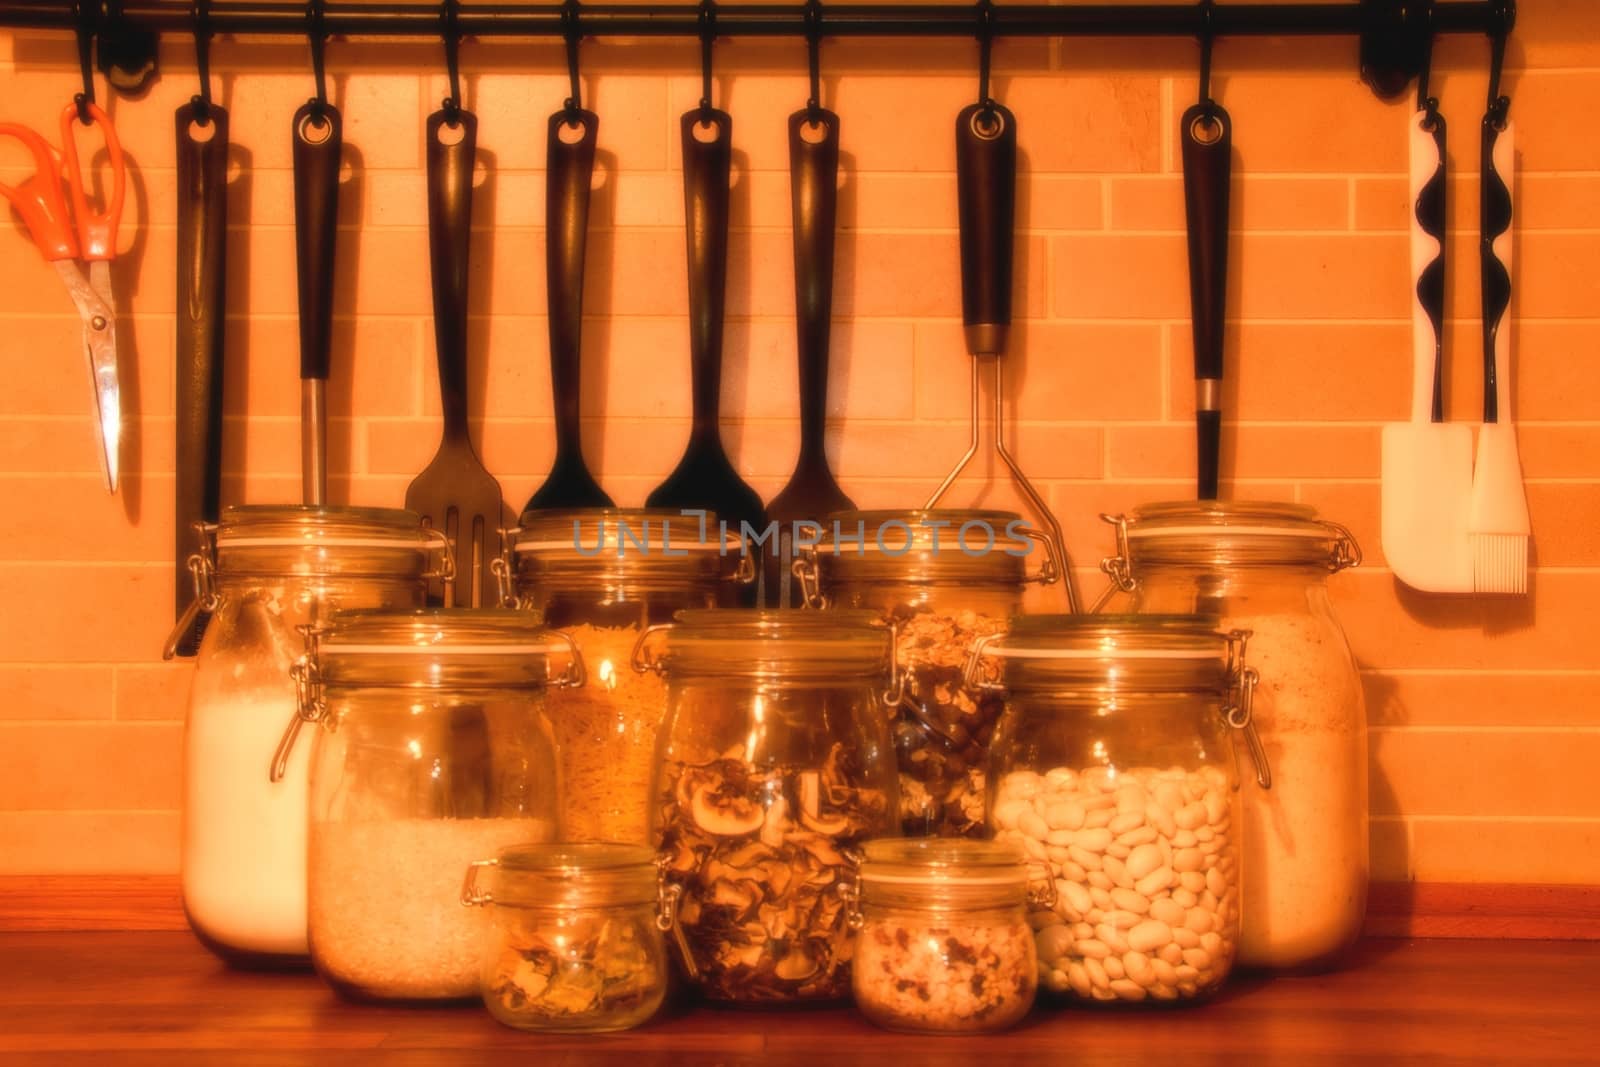 Kitchen jars for kitchen ingredients. Kitchen tools for cooking. Add strong soft filter by roman_nerud